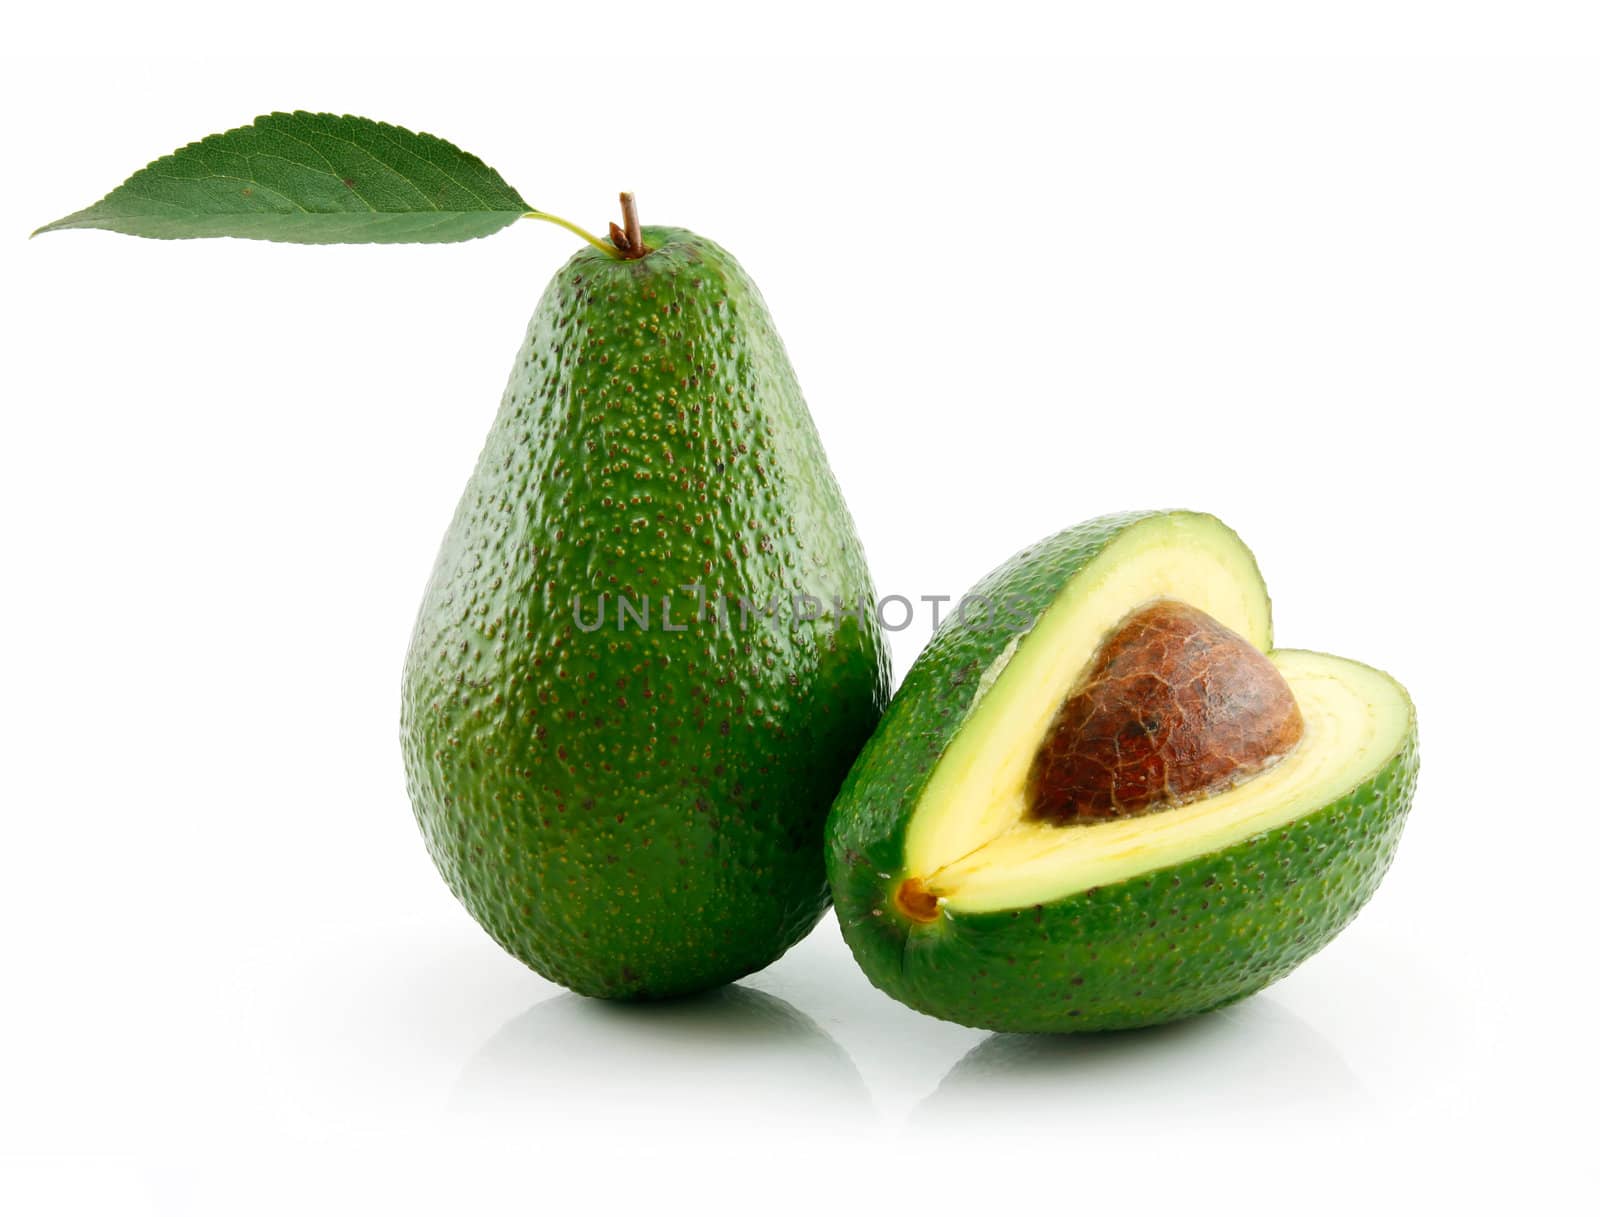 Ripe Avocado With Green Leaf Isolated on White by alphacell